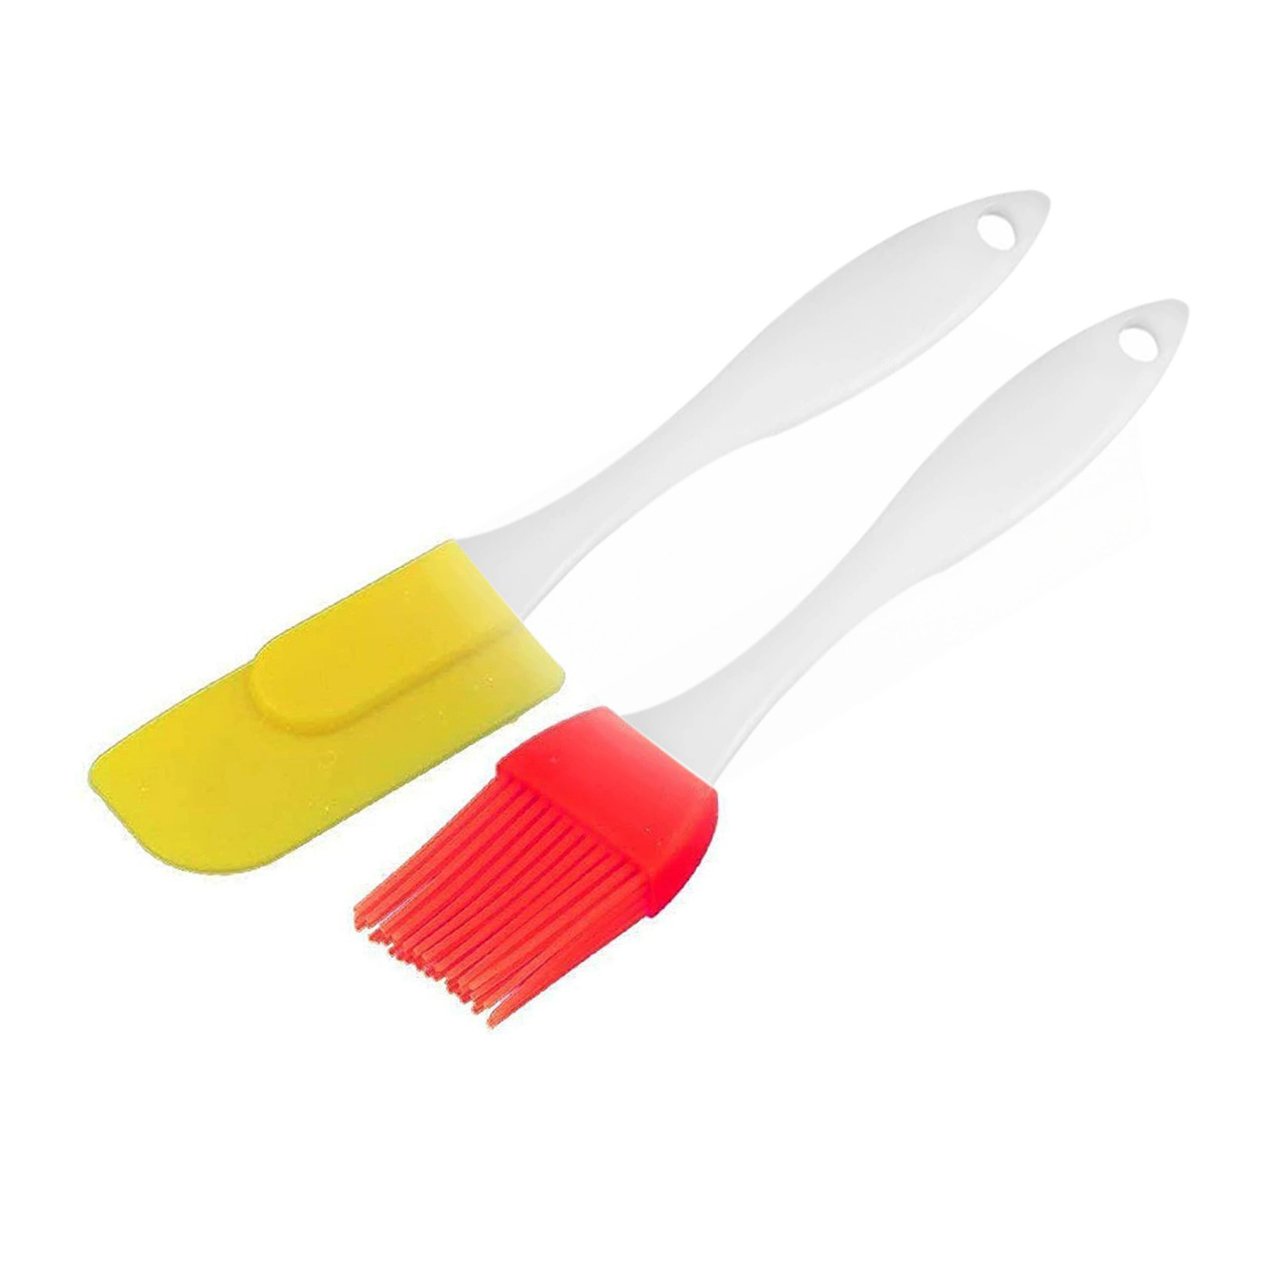 2170 Spatula and Pastry Brush for Cake Decoration - SkyShopy